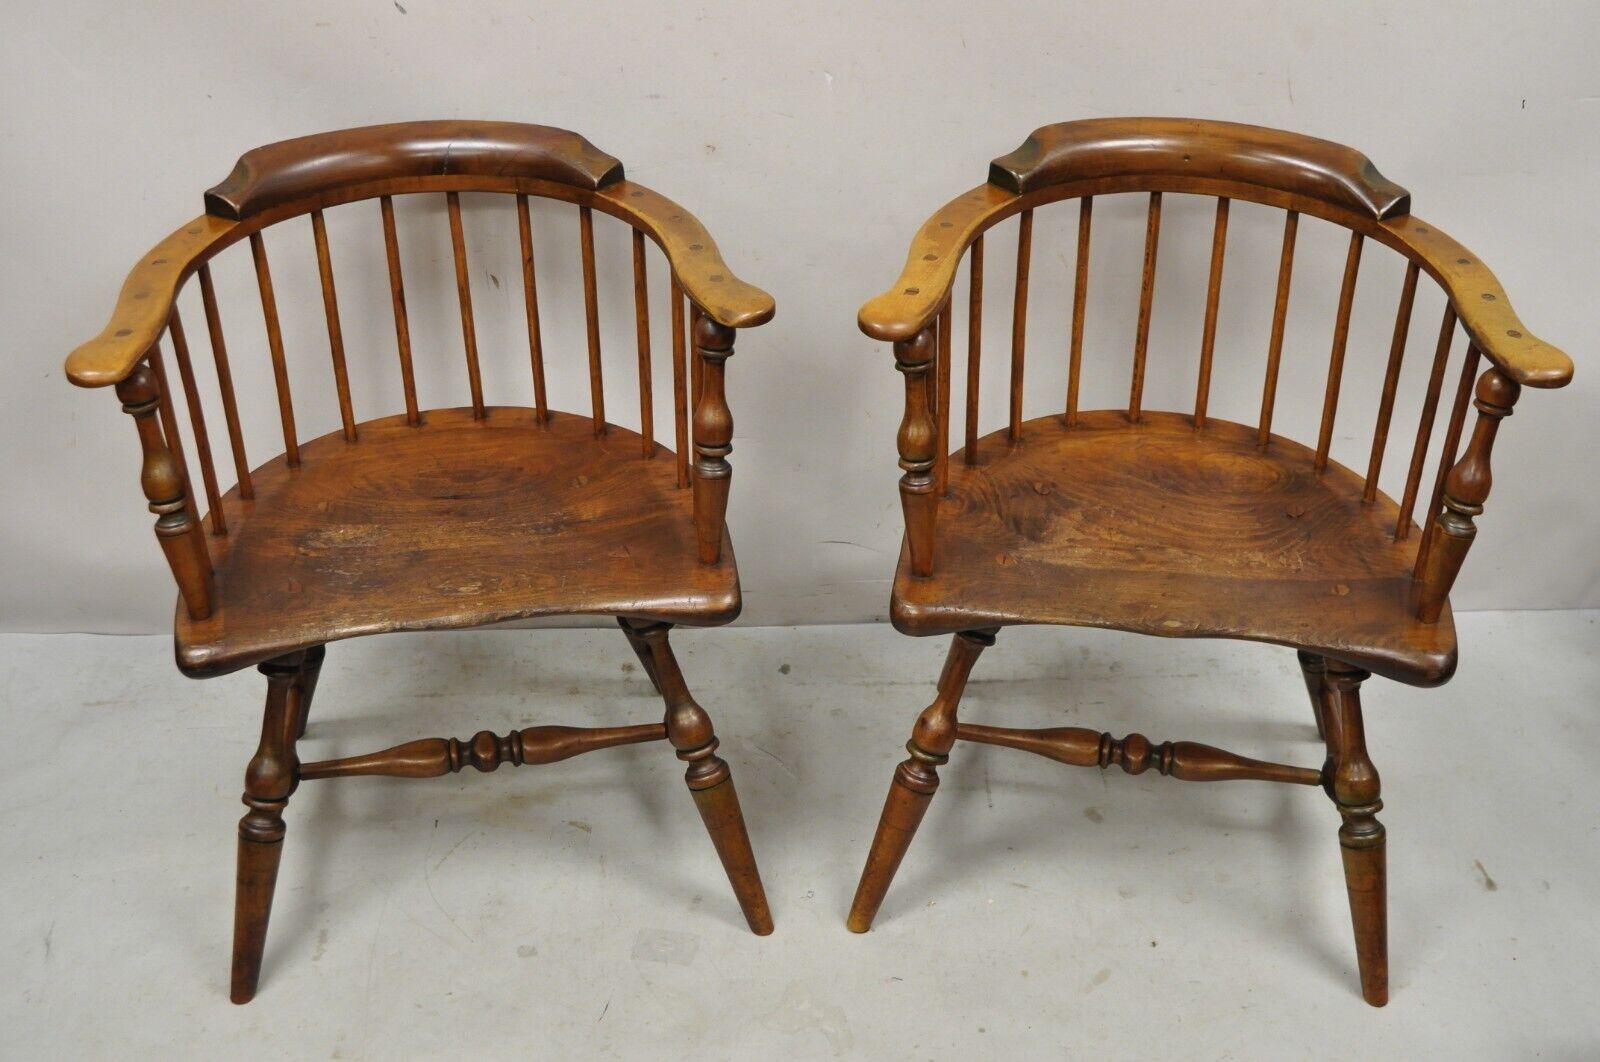 Antique Windsor Colonial Style Pine Wood Spindle Pub Arm Chairs, Pair For Sale 4